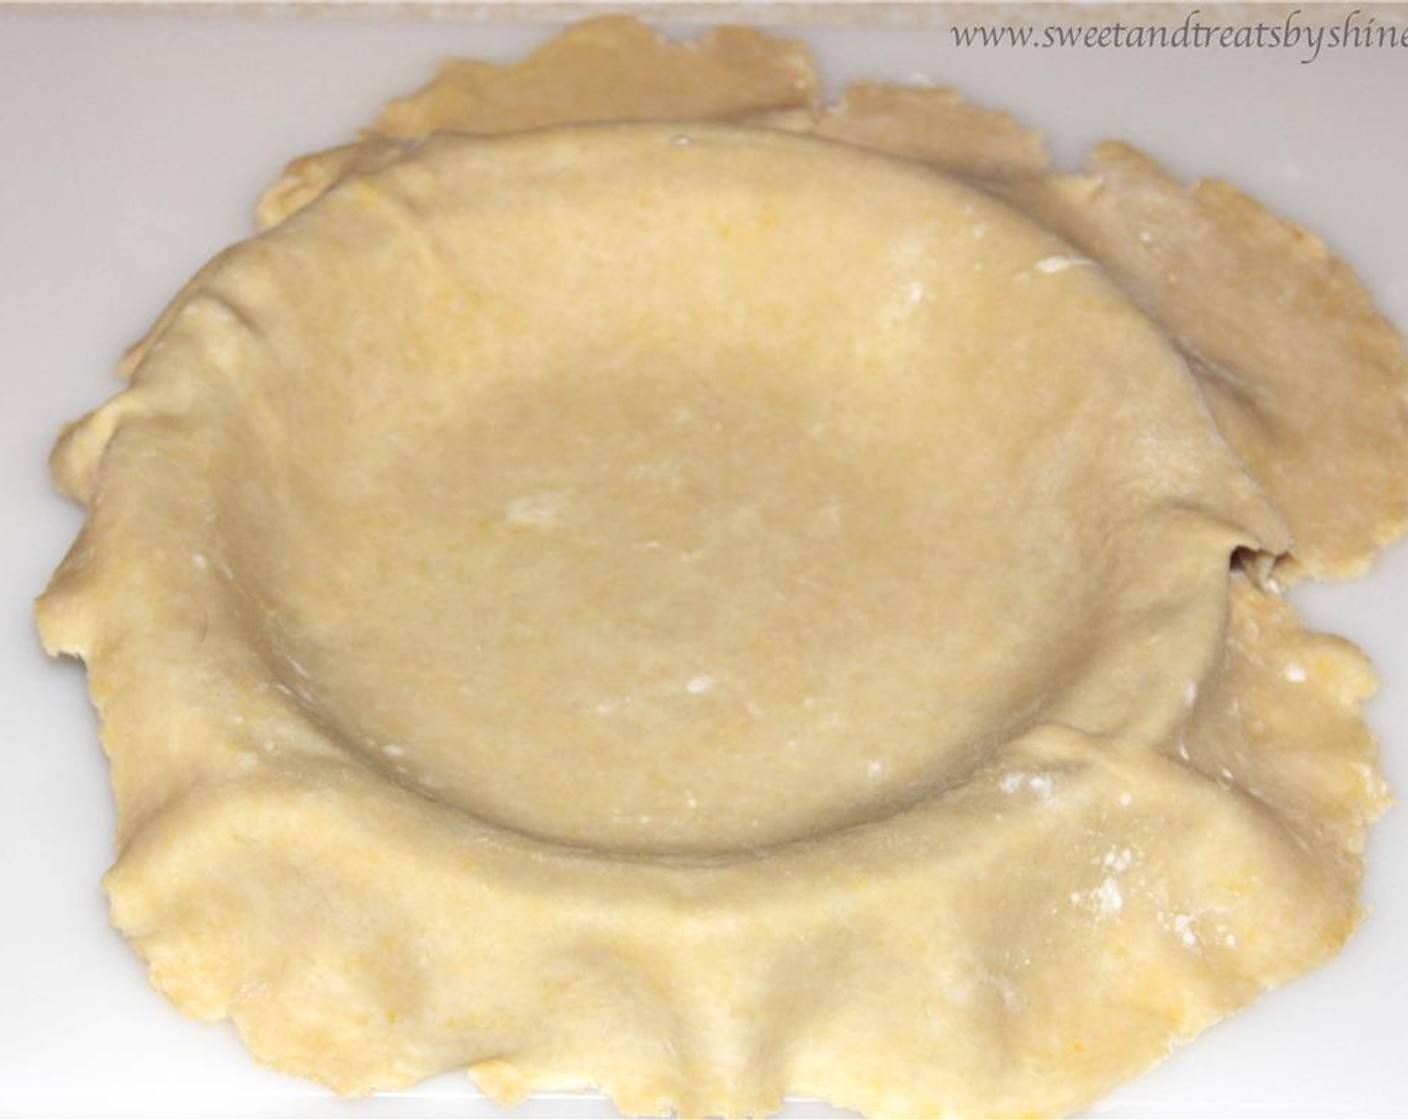 step 2 Roll out one half into a 10 to 11-inch circle on floured surface. Transfer onto the pie pan. Cut the extra dough hanging over the edges. Put it back into the fridge.